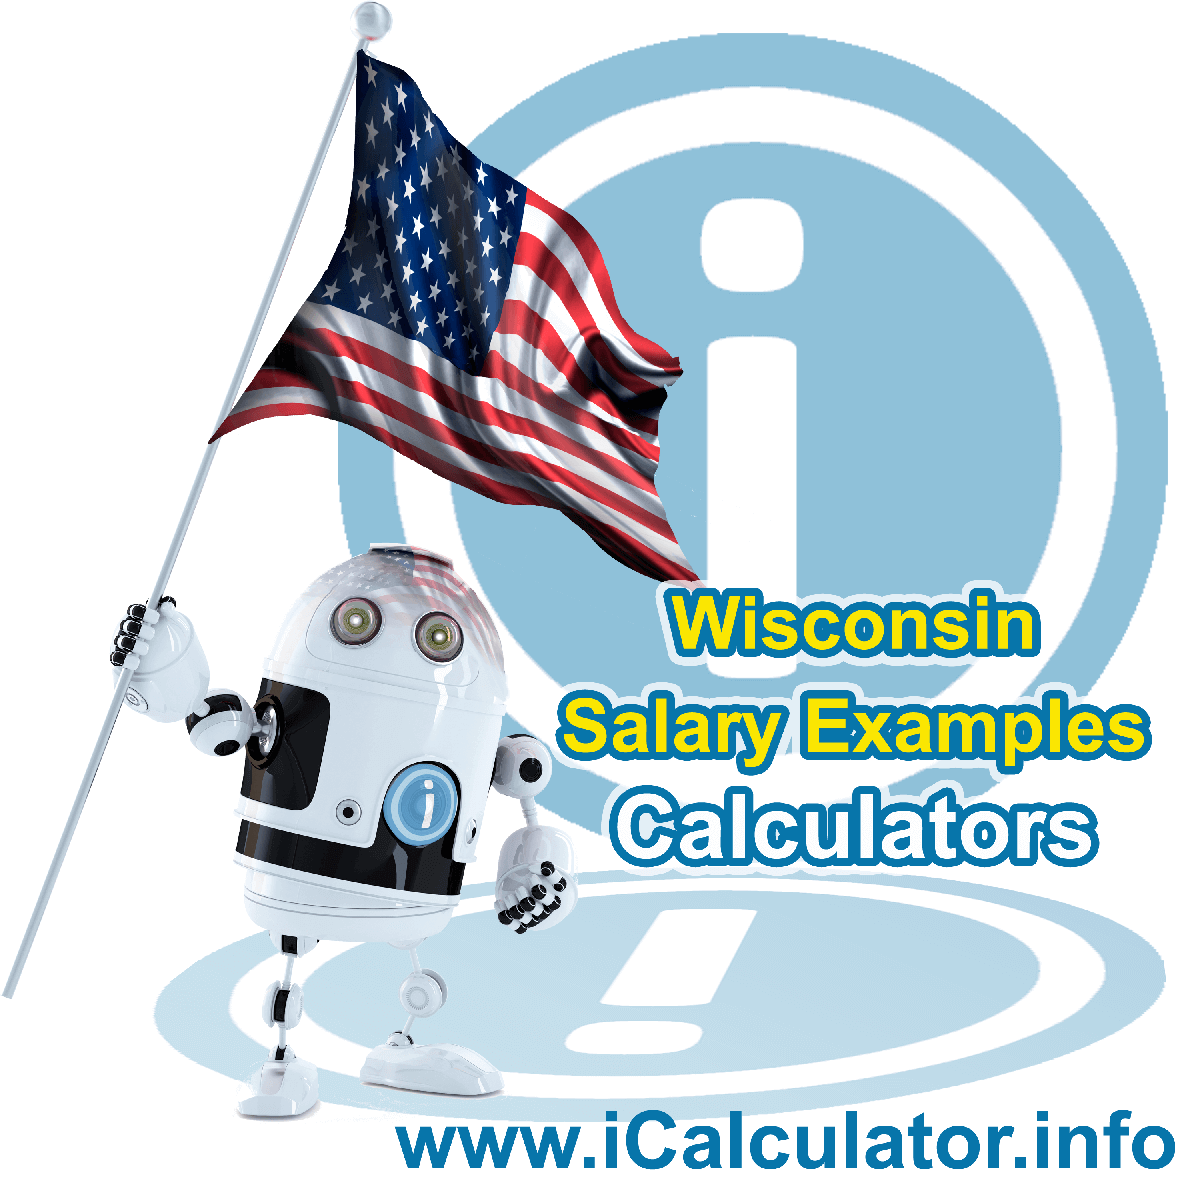 Wisconsin Salary Example for $ 170,000.00 in 2023 | iCalculator™ | $ 170,000.00 salary example for employee and employer paying Wisconsin State tincome taxes. Detailed salary after tax calculation including Wisconsin State Tax, Federal State Tax, Medicare Deductions, Social Security, Capital Gains and other income tax and salary deductions complete with supporting Wisconsin state tax tables 